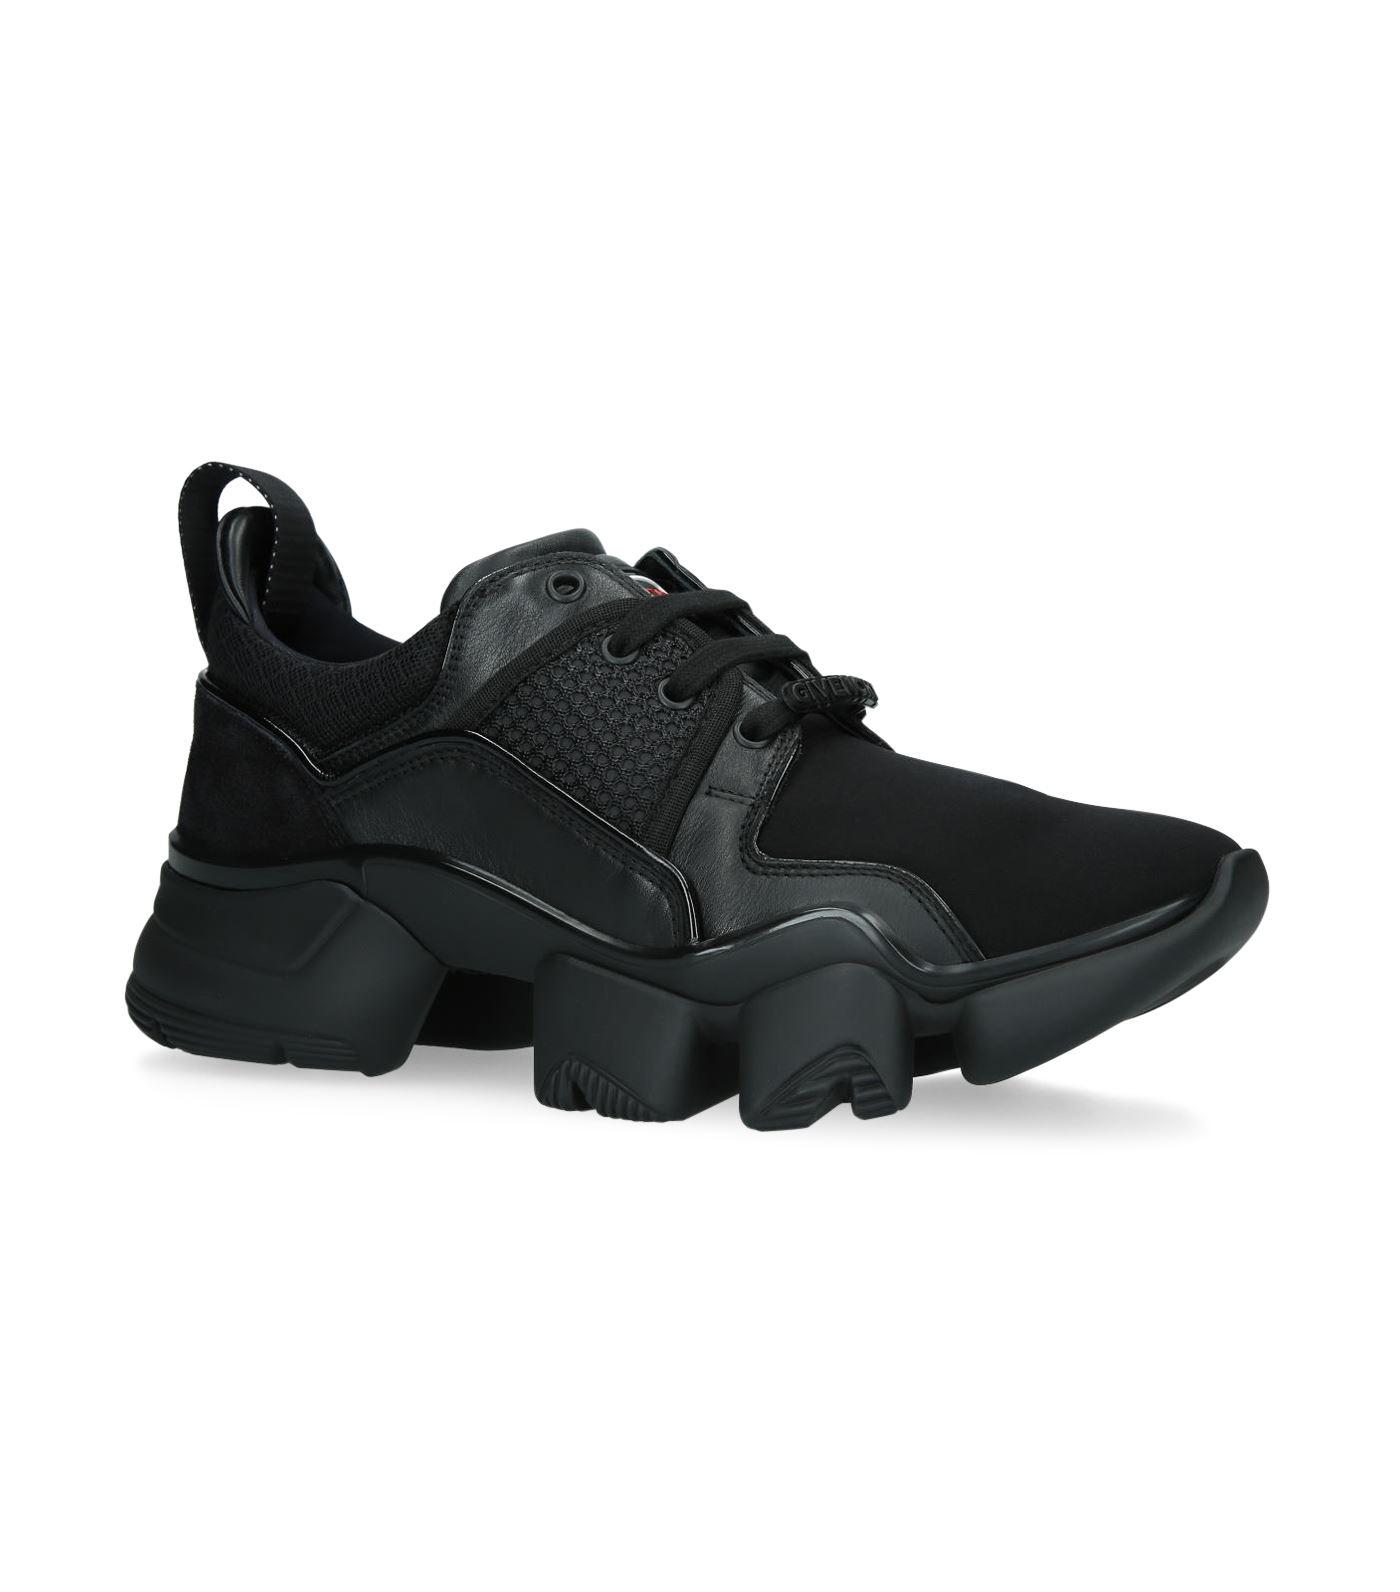 Givenchy Neoprene Jaw Sneakers in Black for Men - Save 56% - Lyst